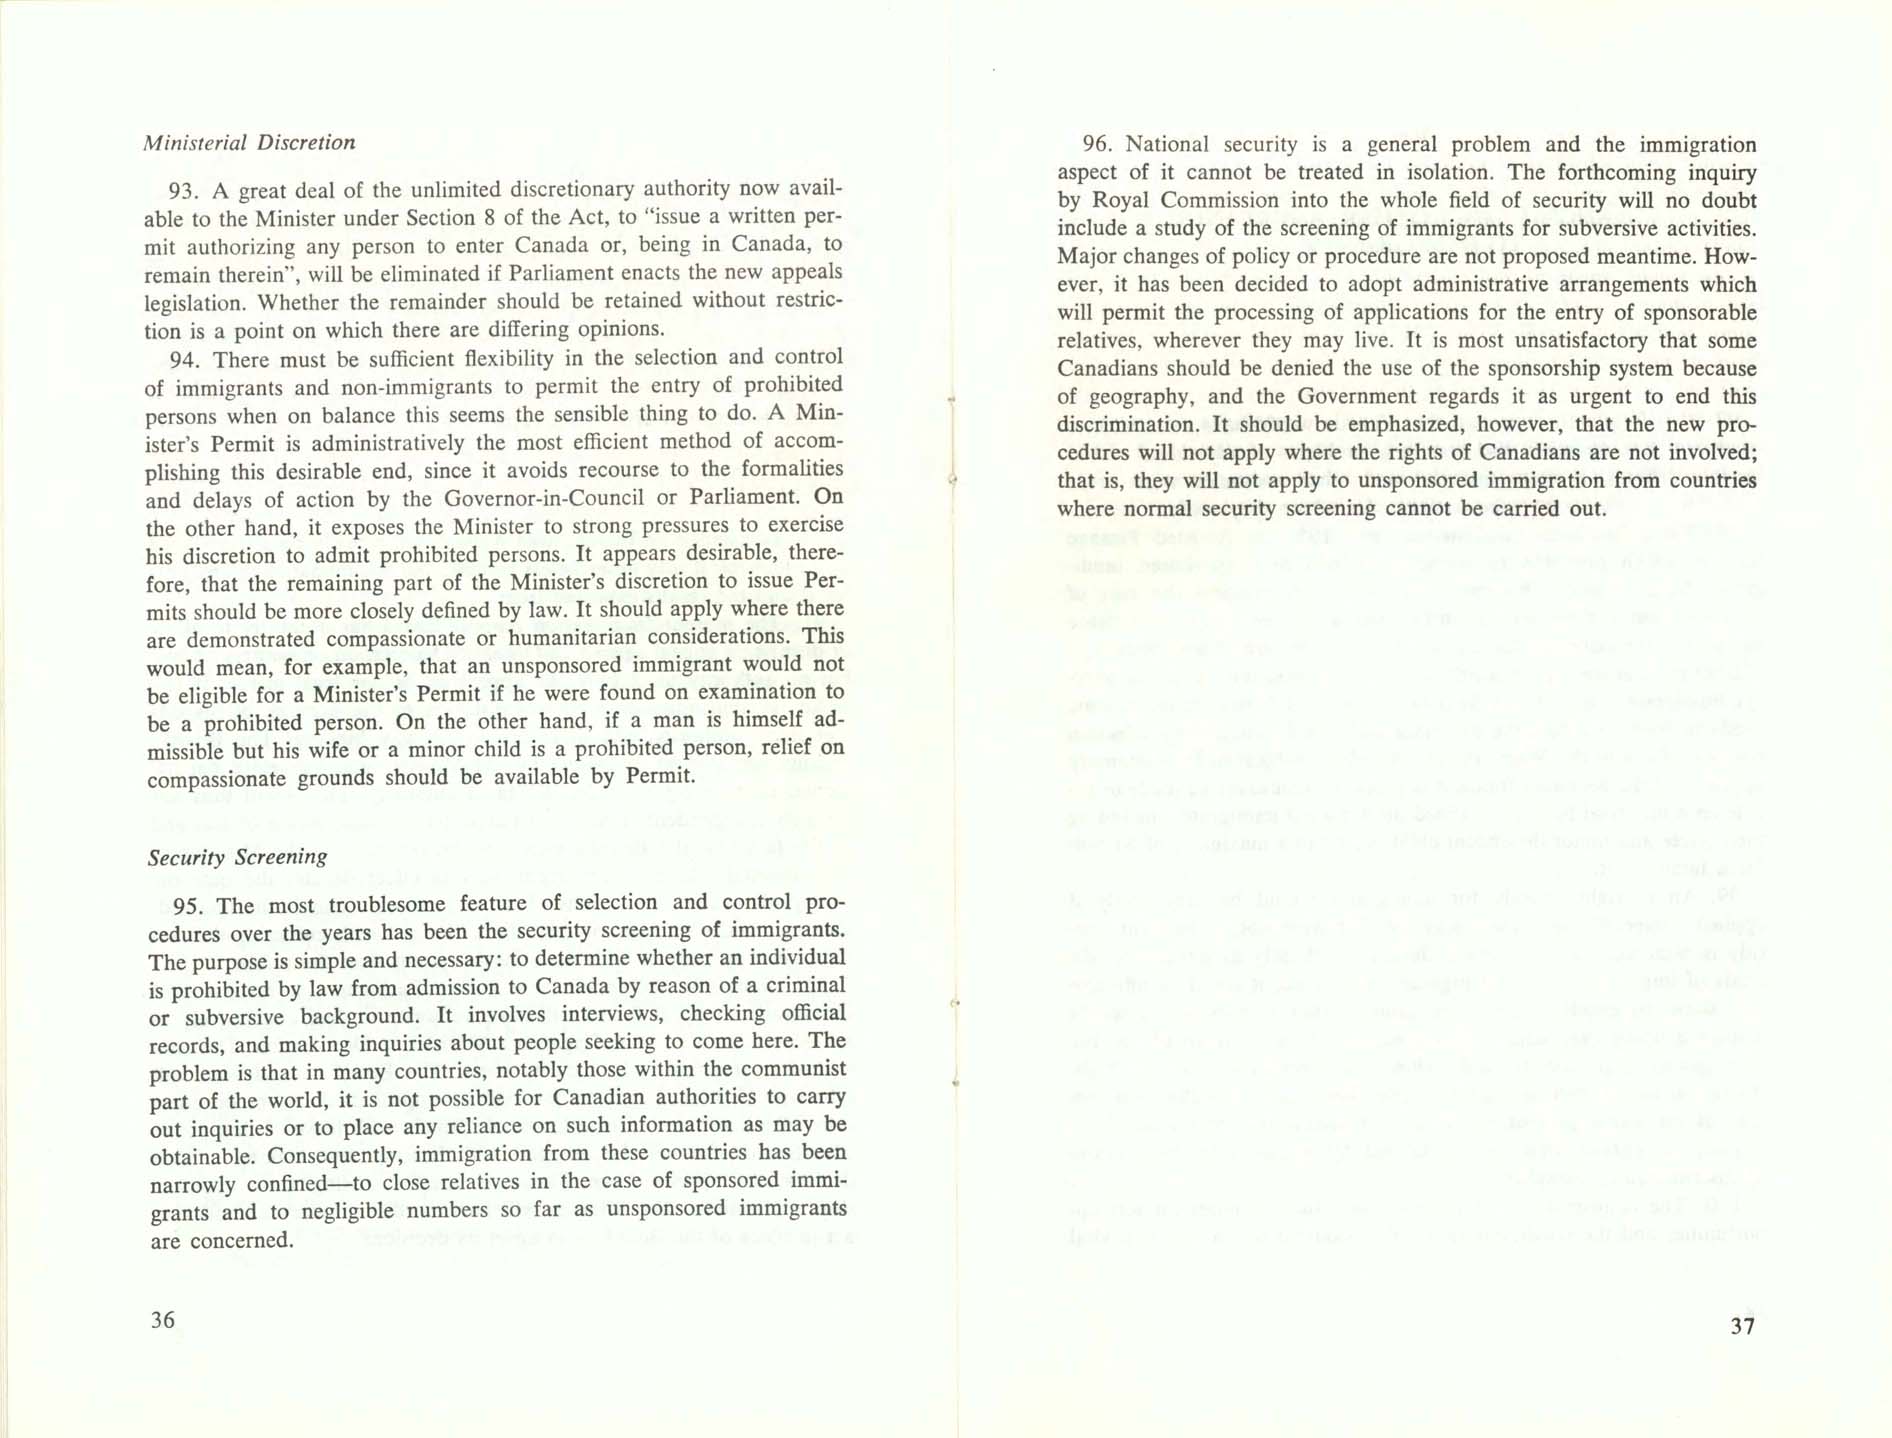 Page 36, 37 White Paper on Immigration, 1966